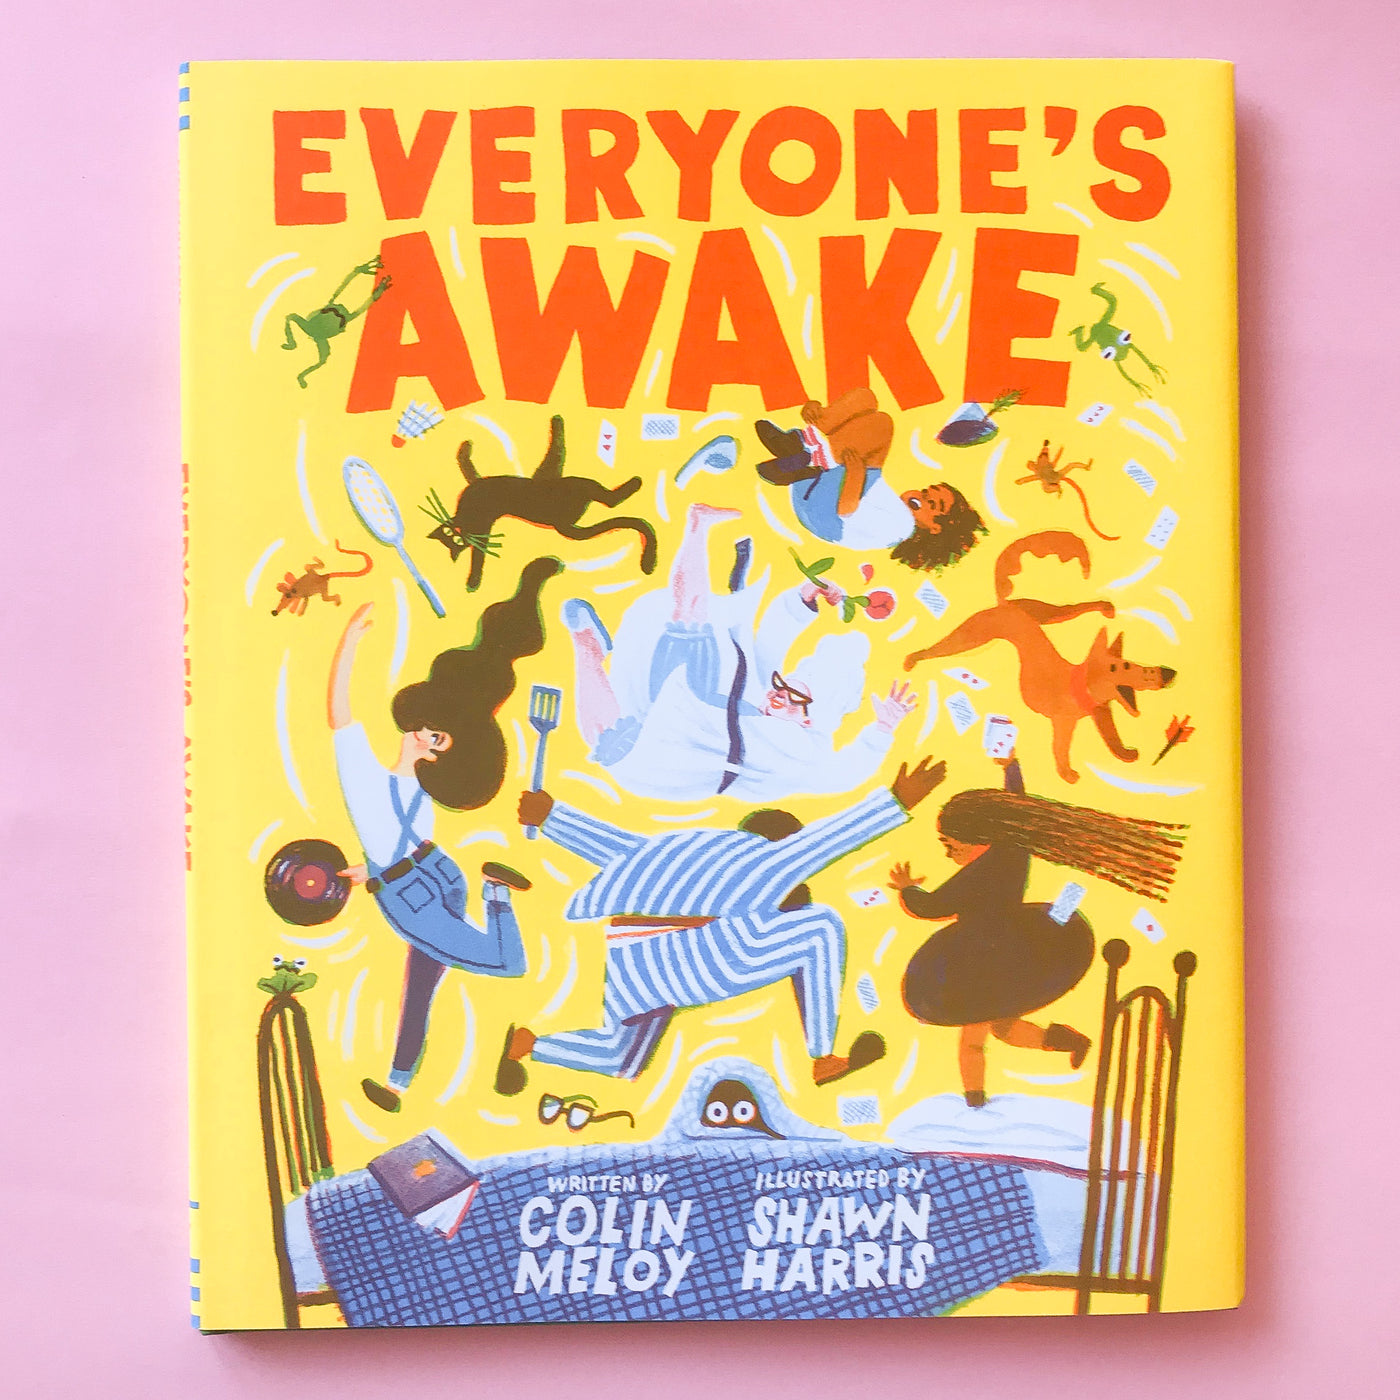 Everyone's Awake by Colin Meloy